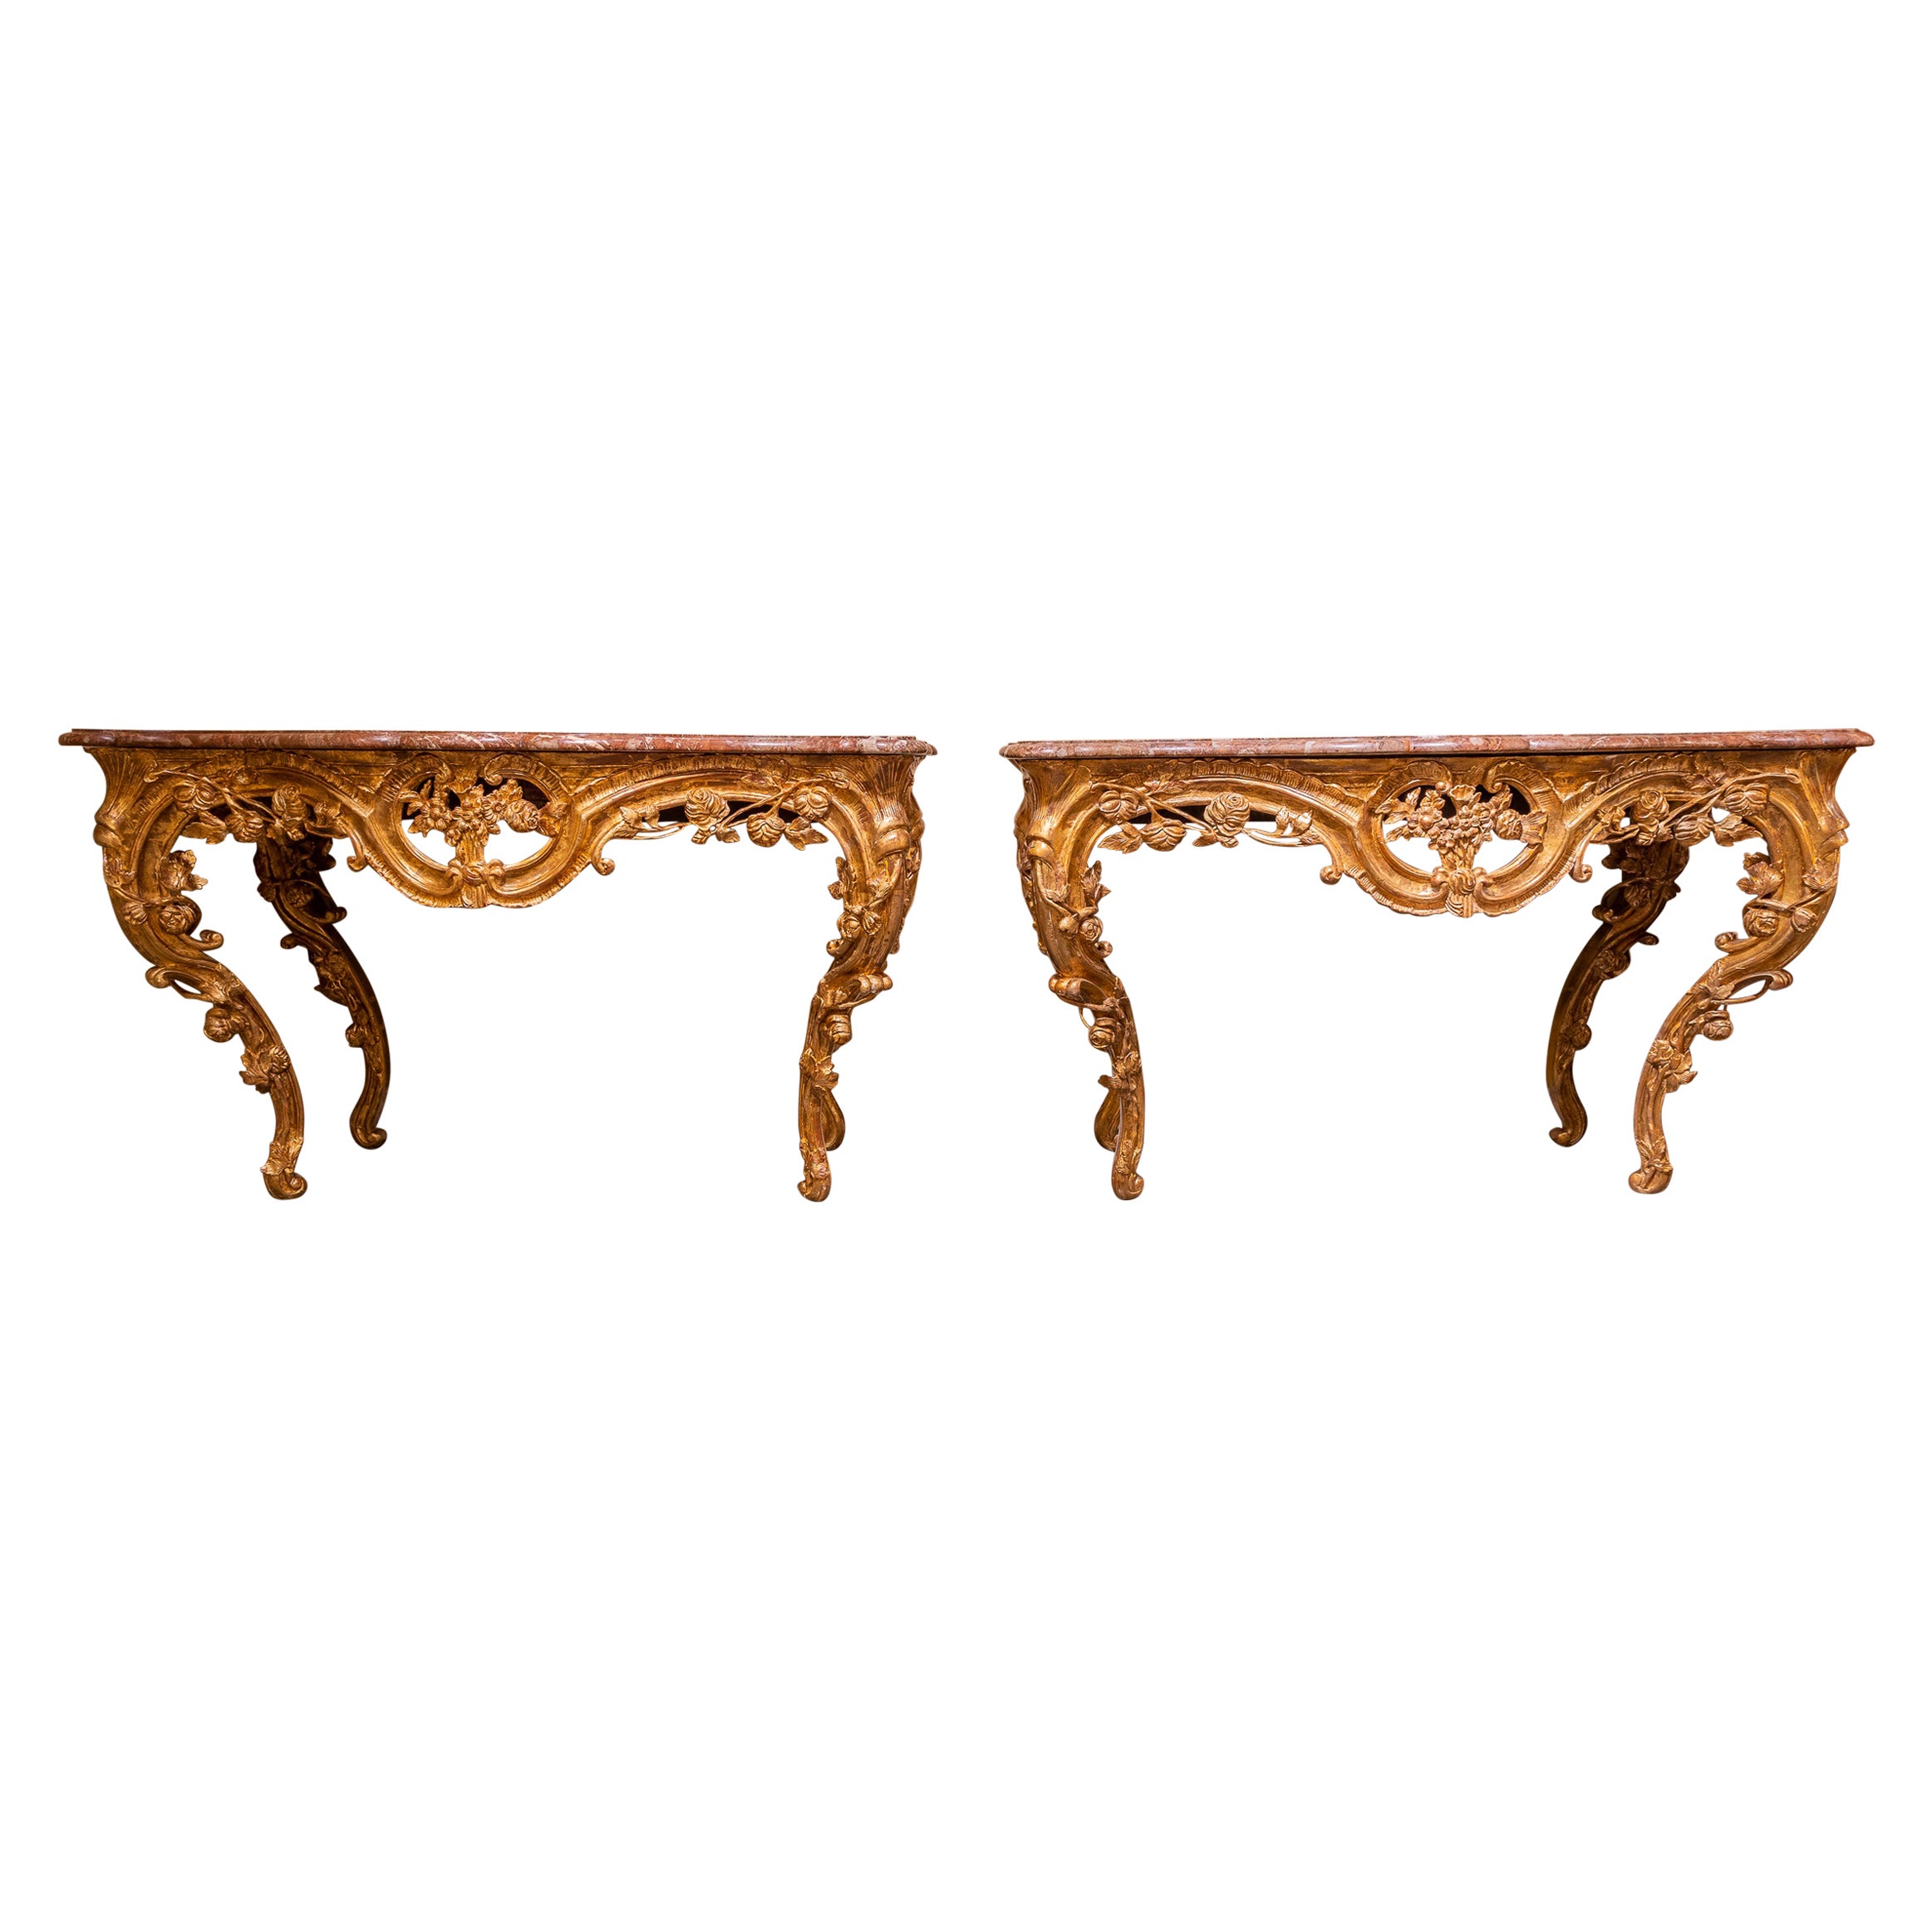 Fine Pair of 19th Century Italian Louis XV Carved and Gilt Marble Top Consoles For Sale